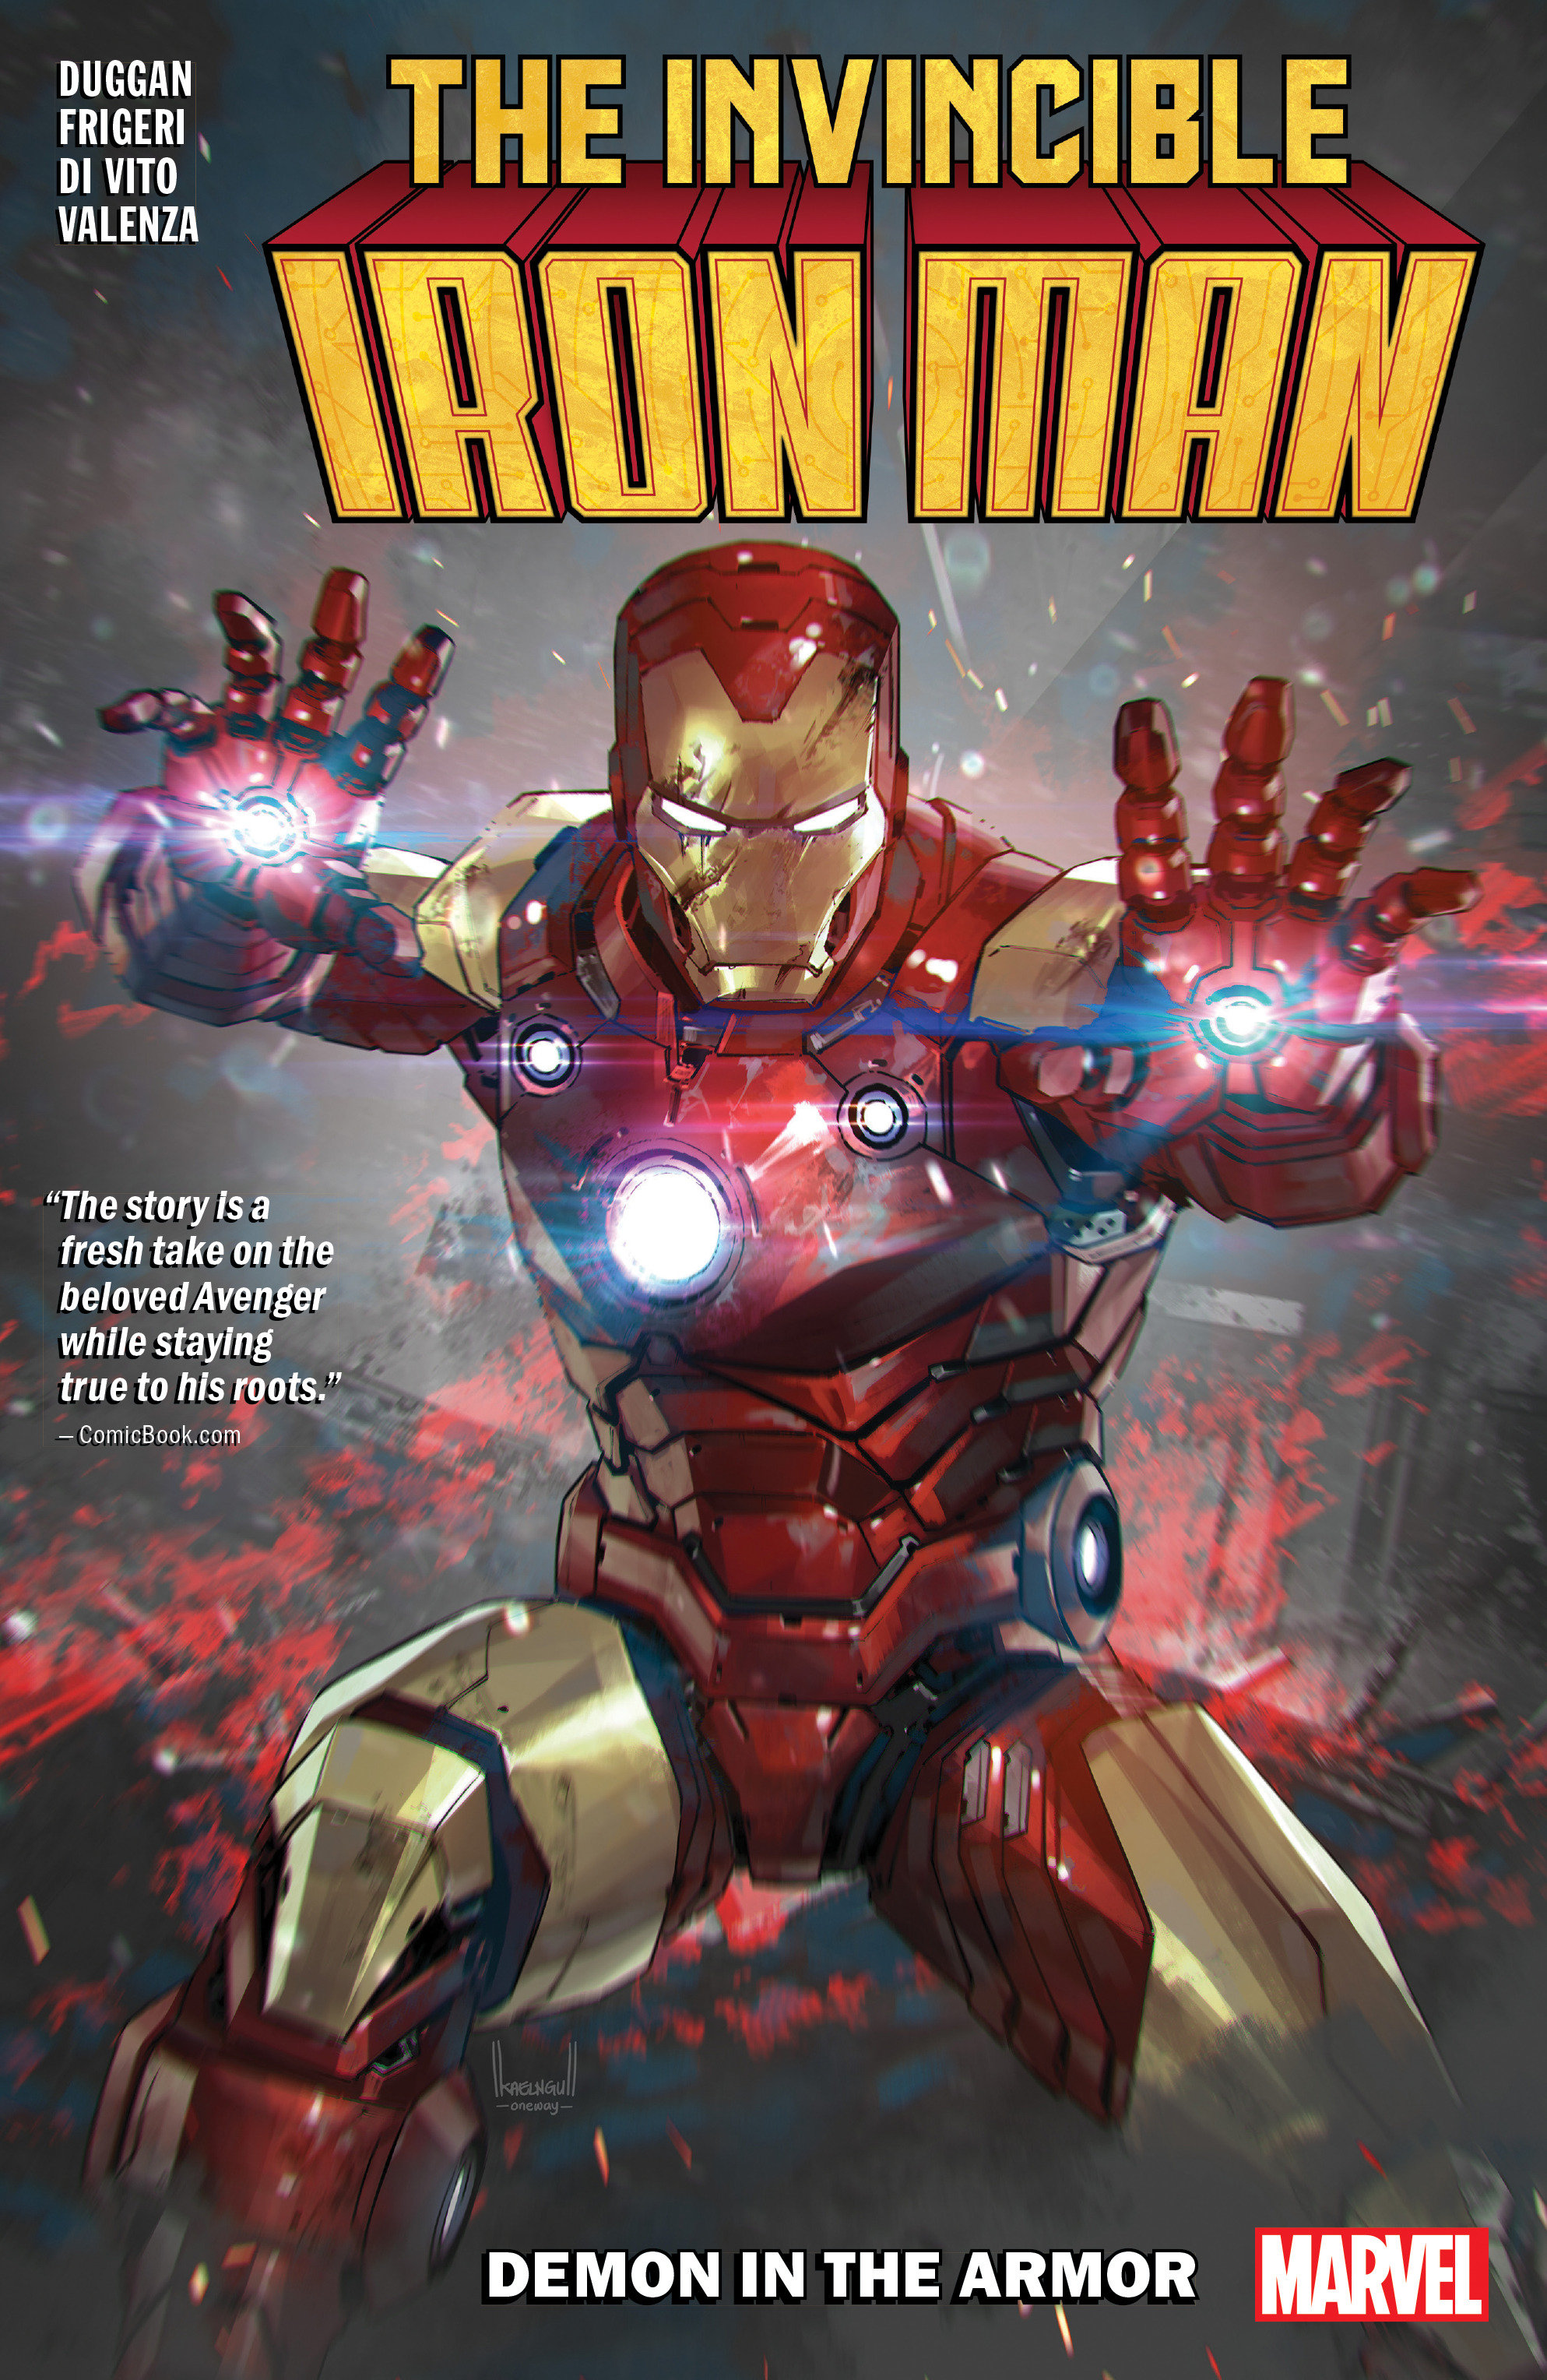 Invincible Iron Man by Gerry Duggan Graphic Novel Volume 1 Demon in the Armor